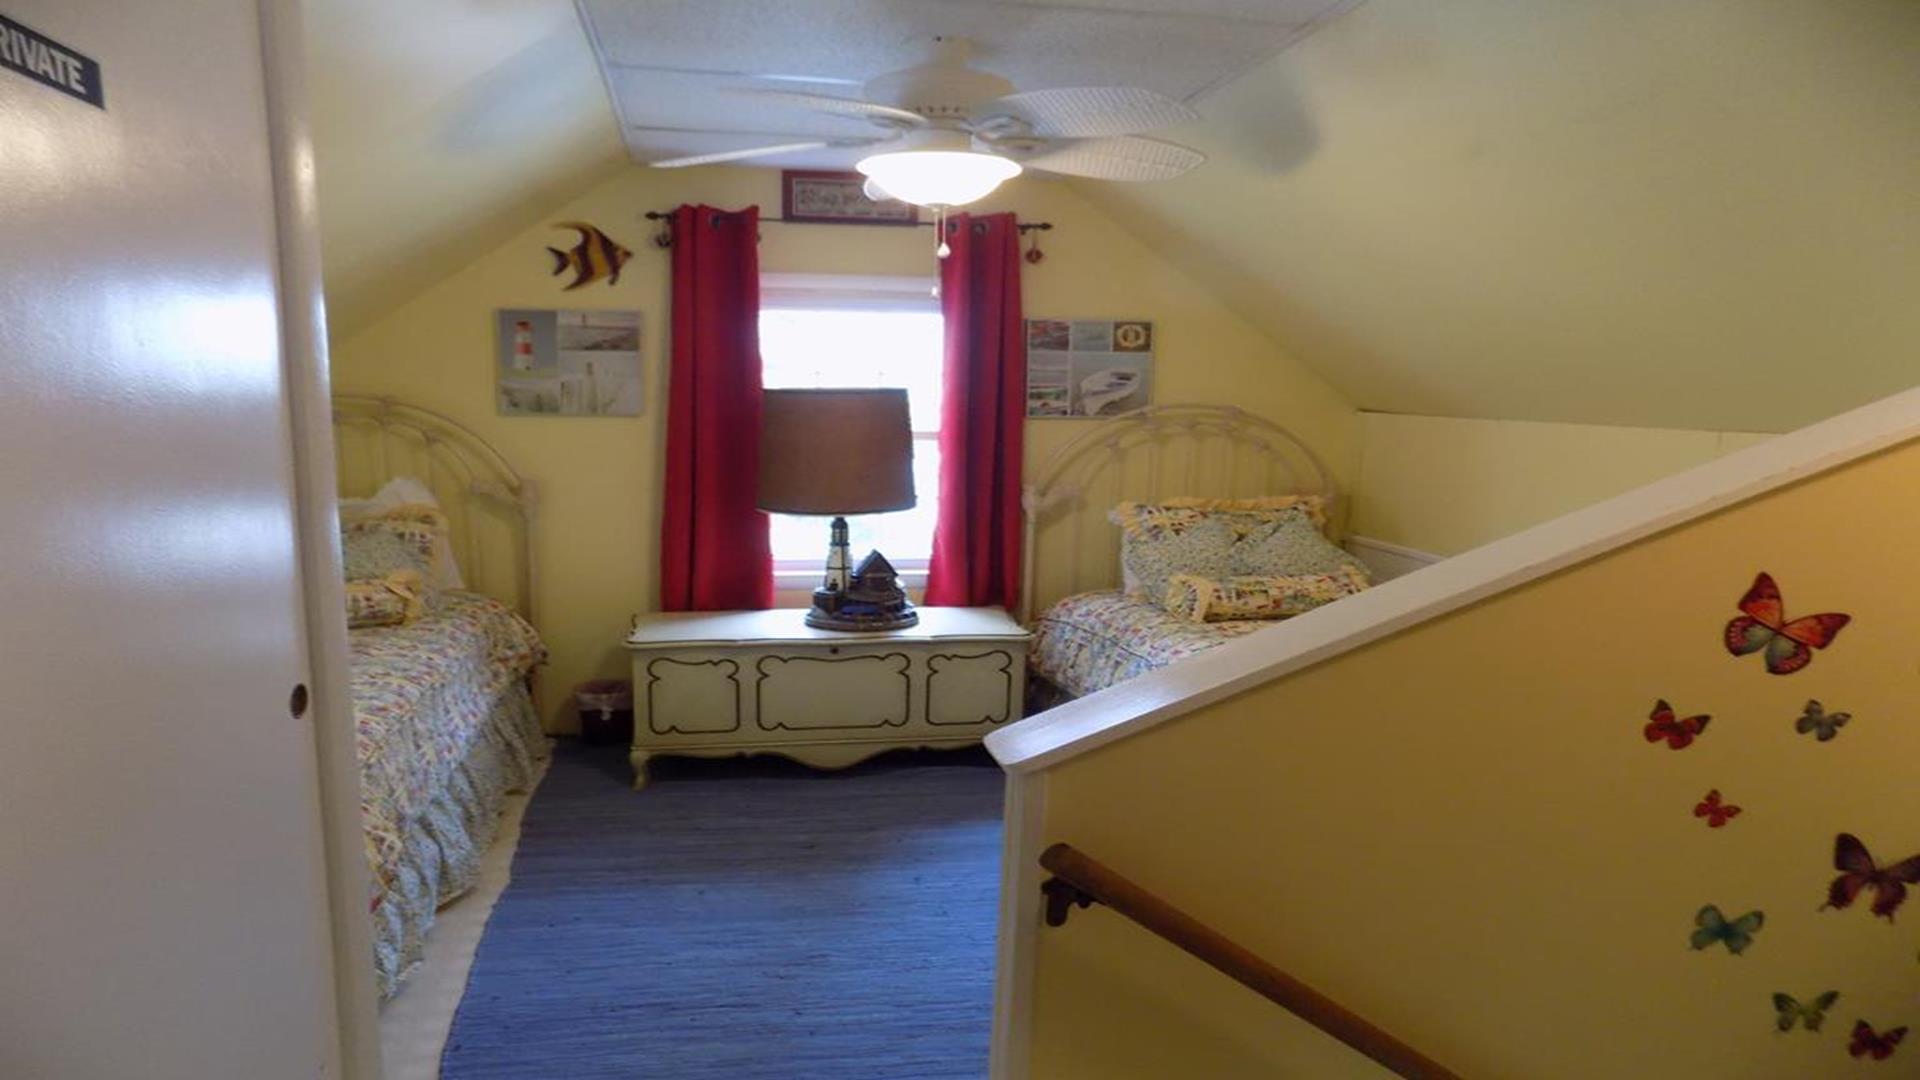 Vacation Rentals Cape May The Whimsical C Z Beach Cottage